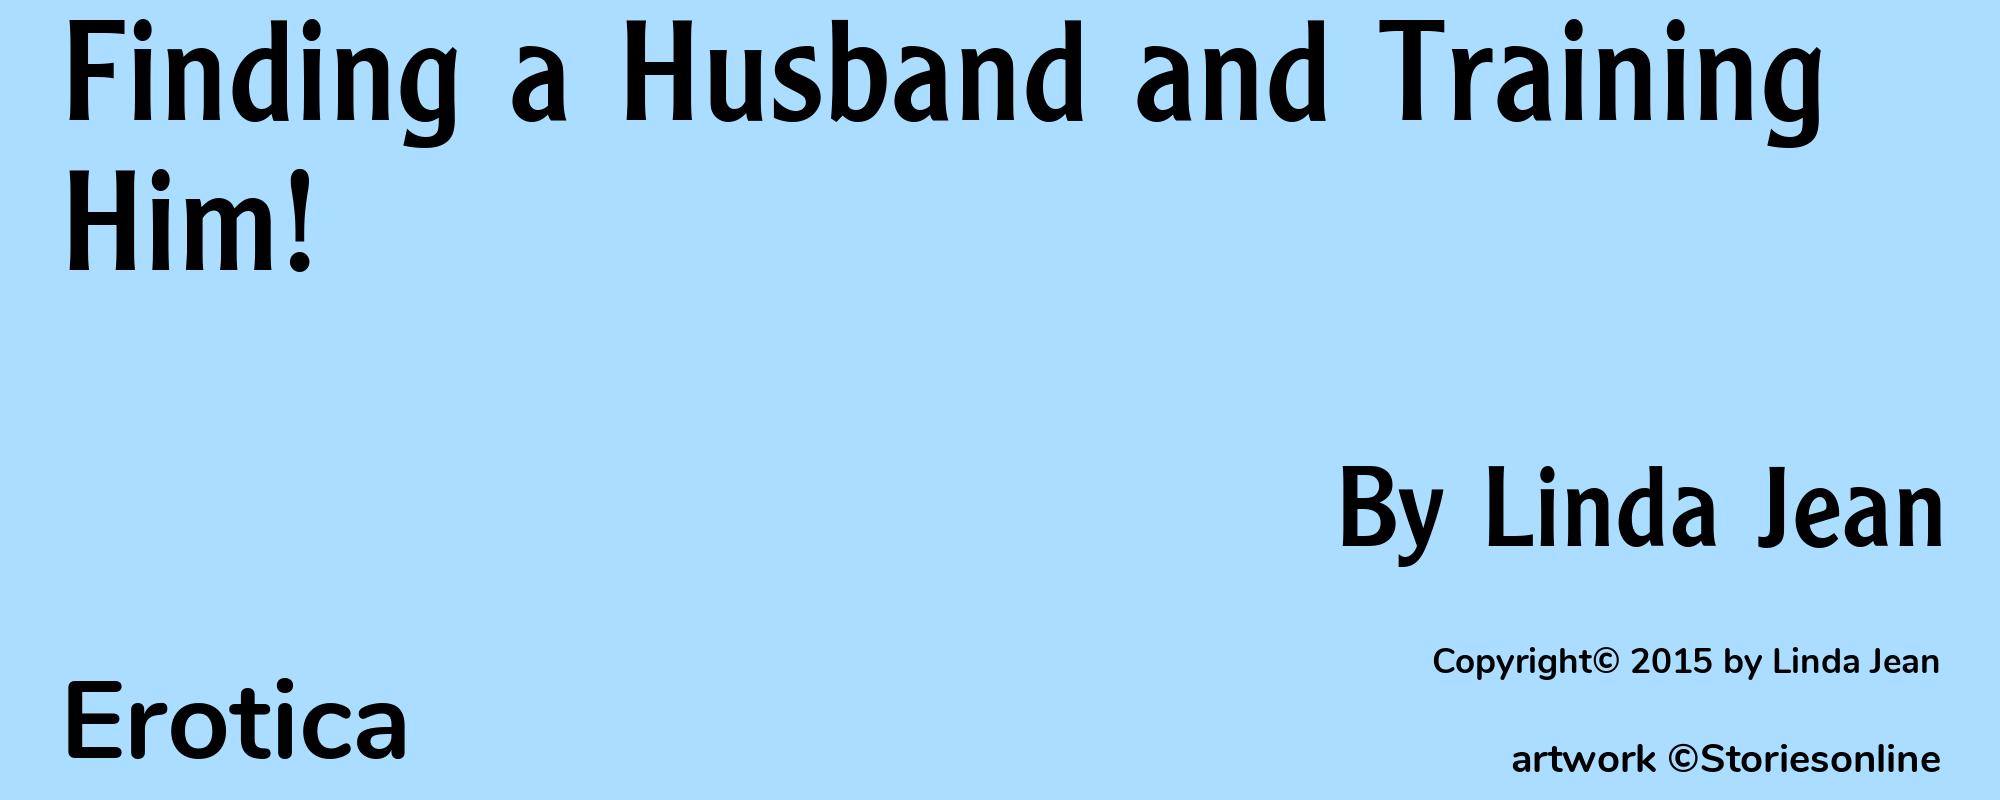 Finding a Husband and Training Him! - Cover